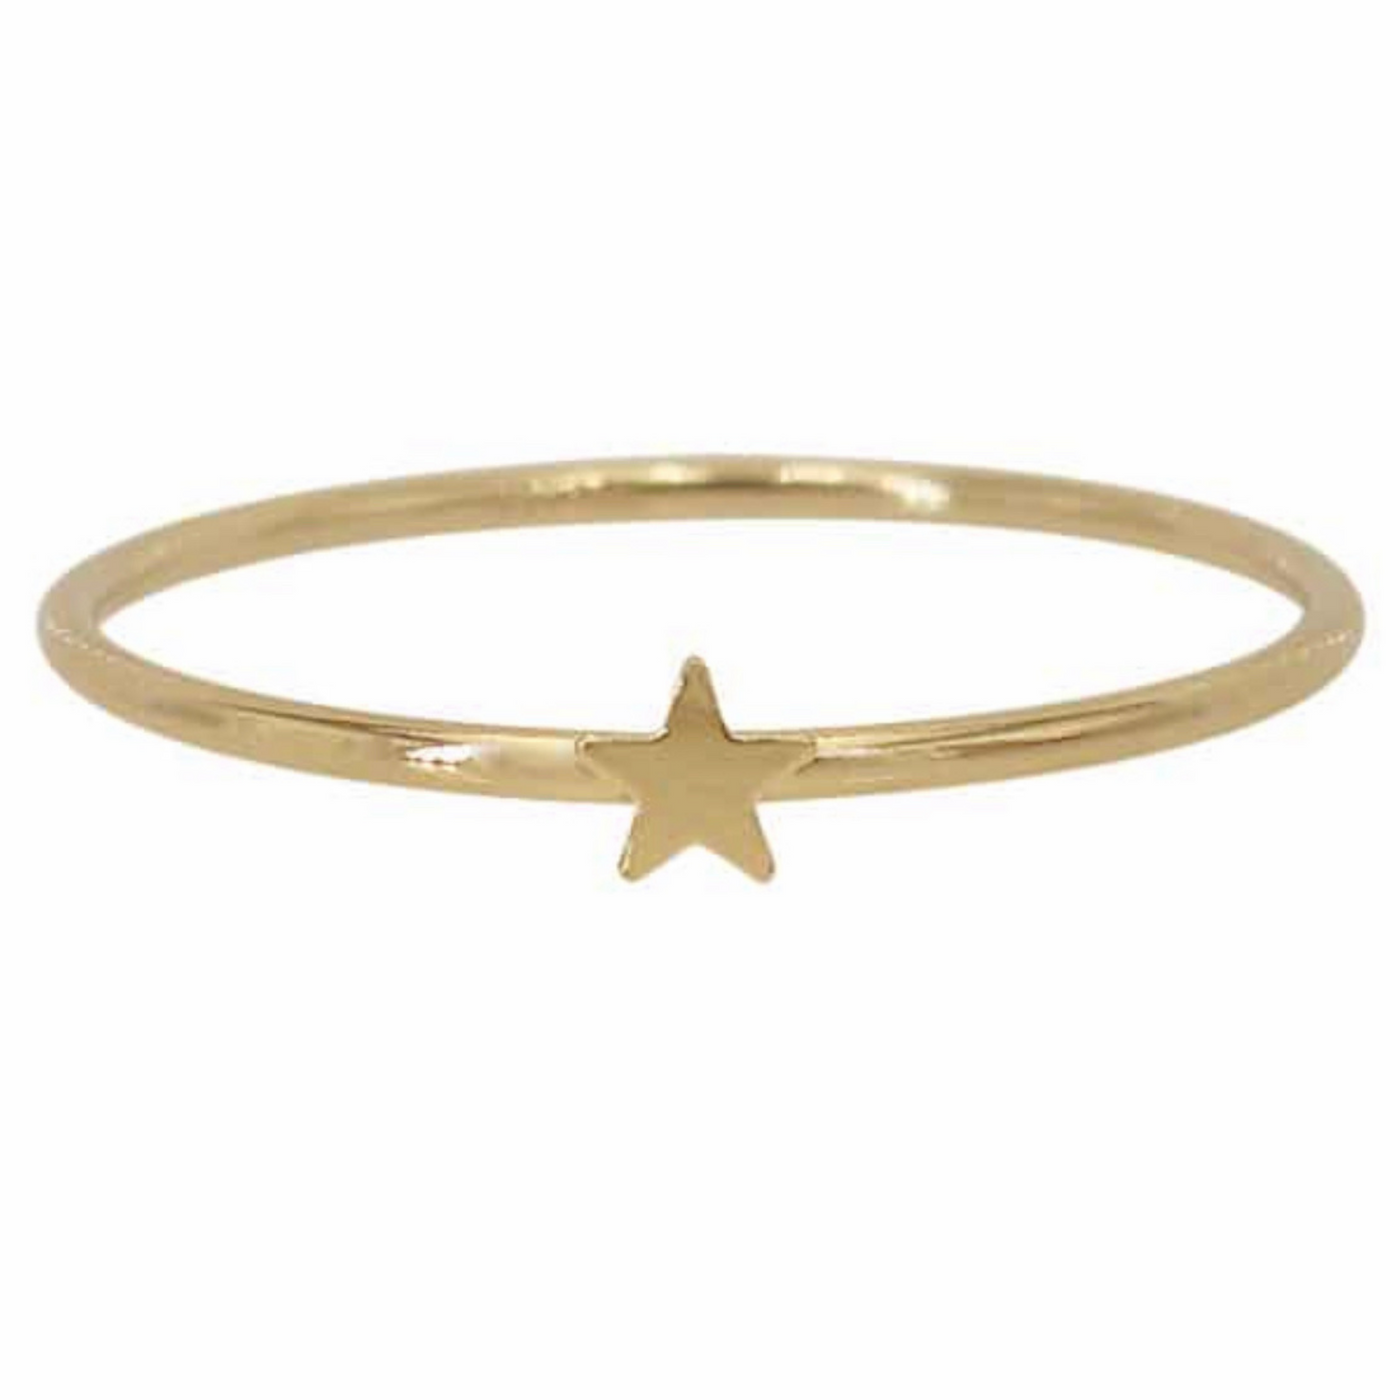 Highly polished 14K gold filled band ring with cut our star shaped accent. Ring is displayed on a white background